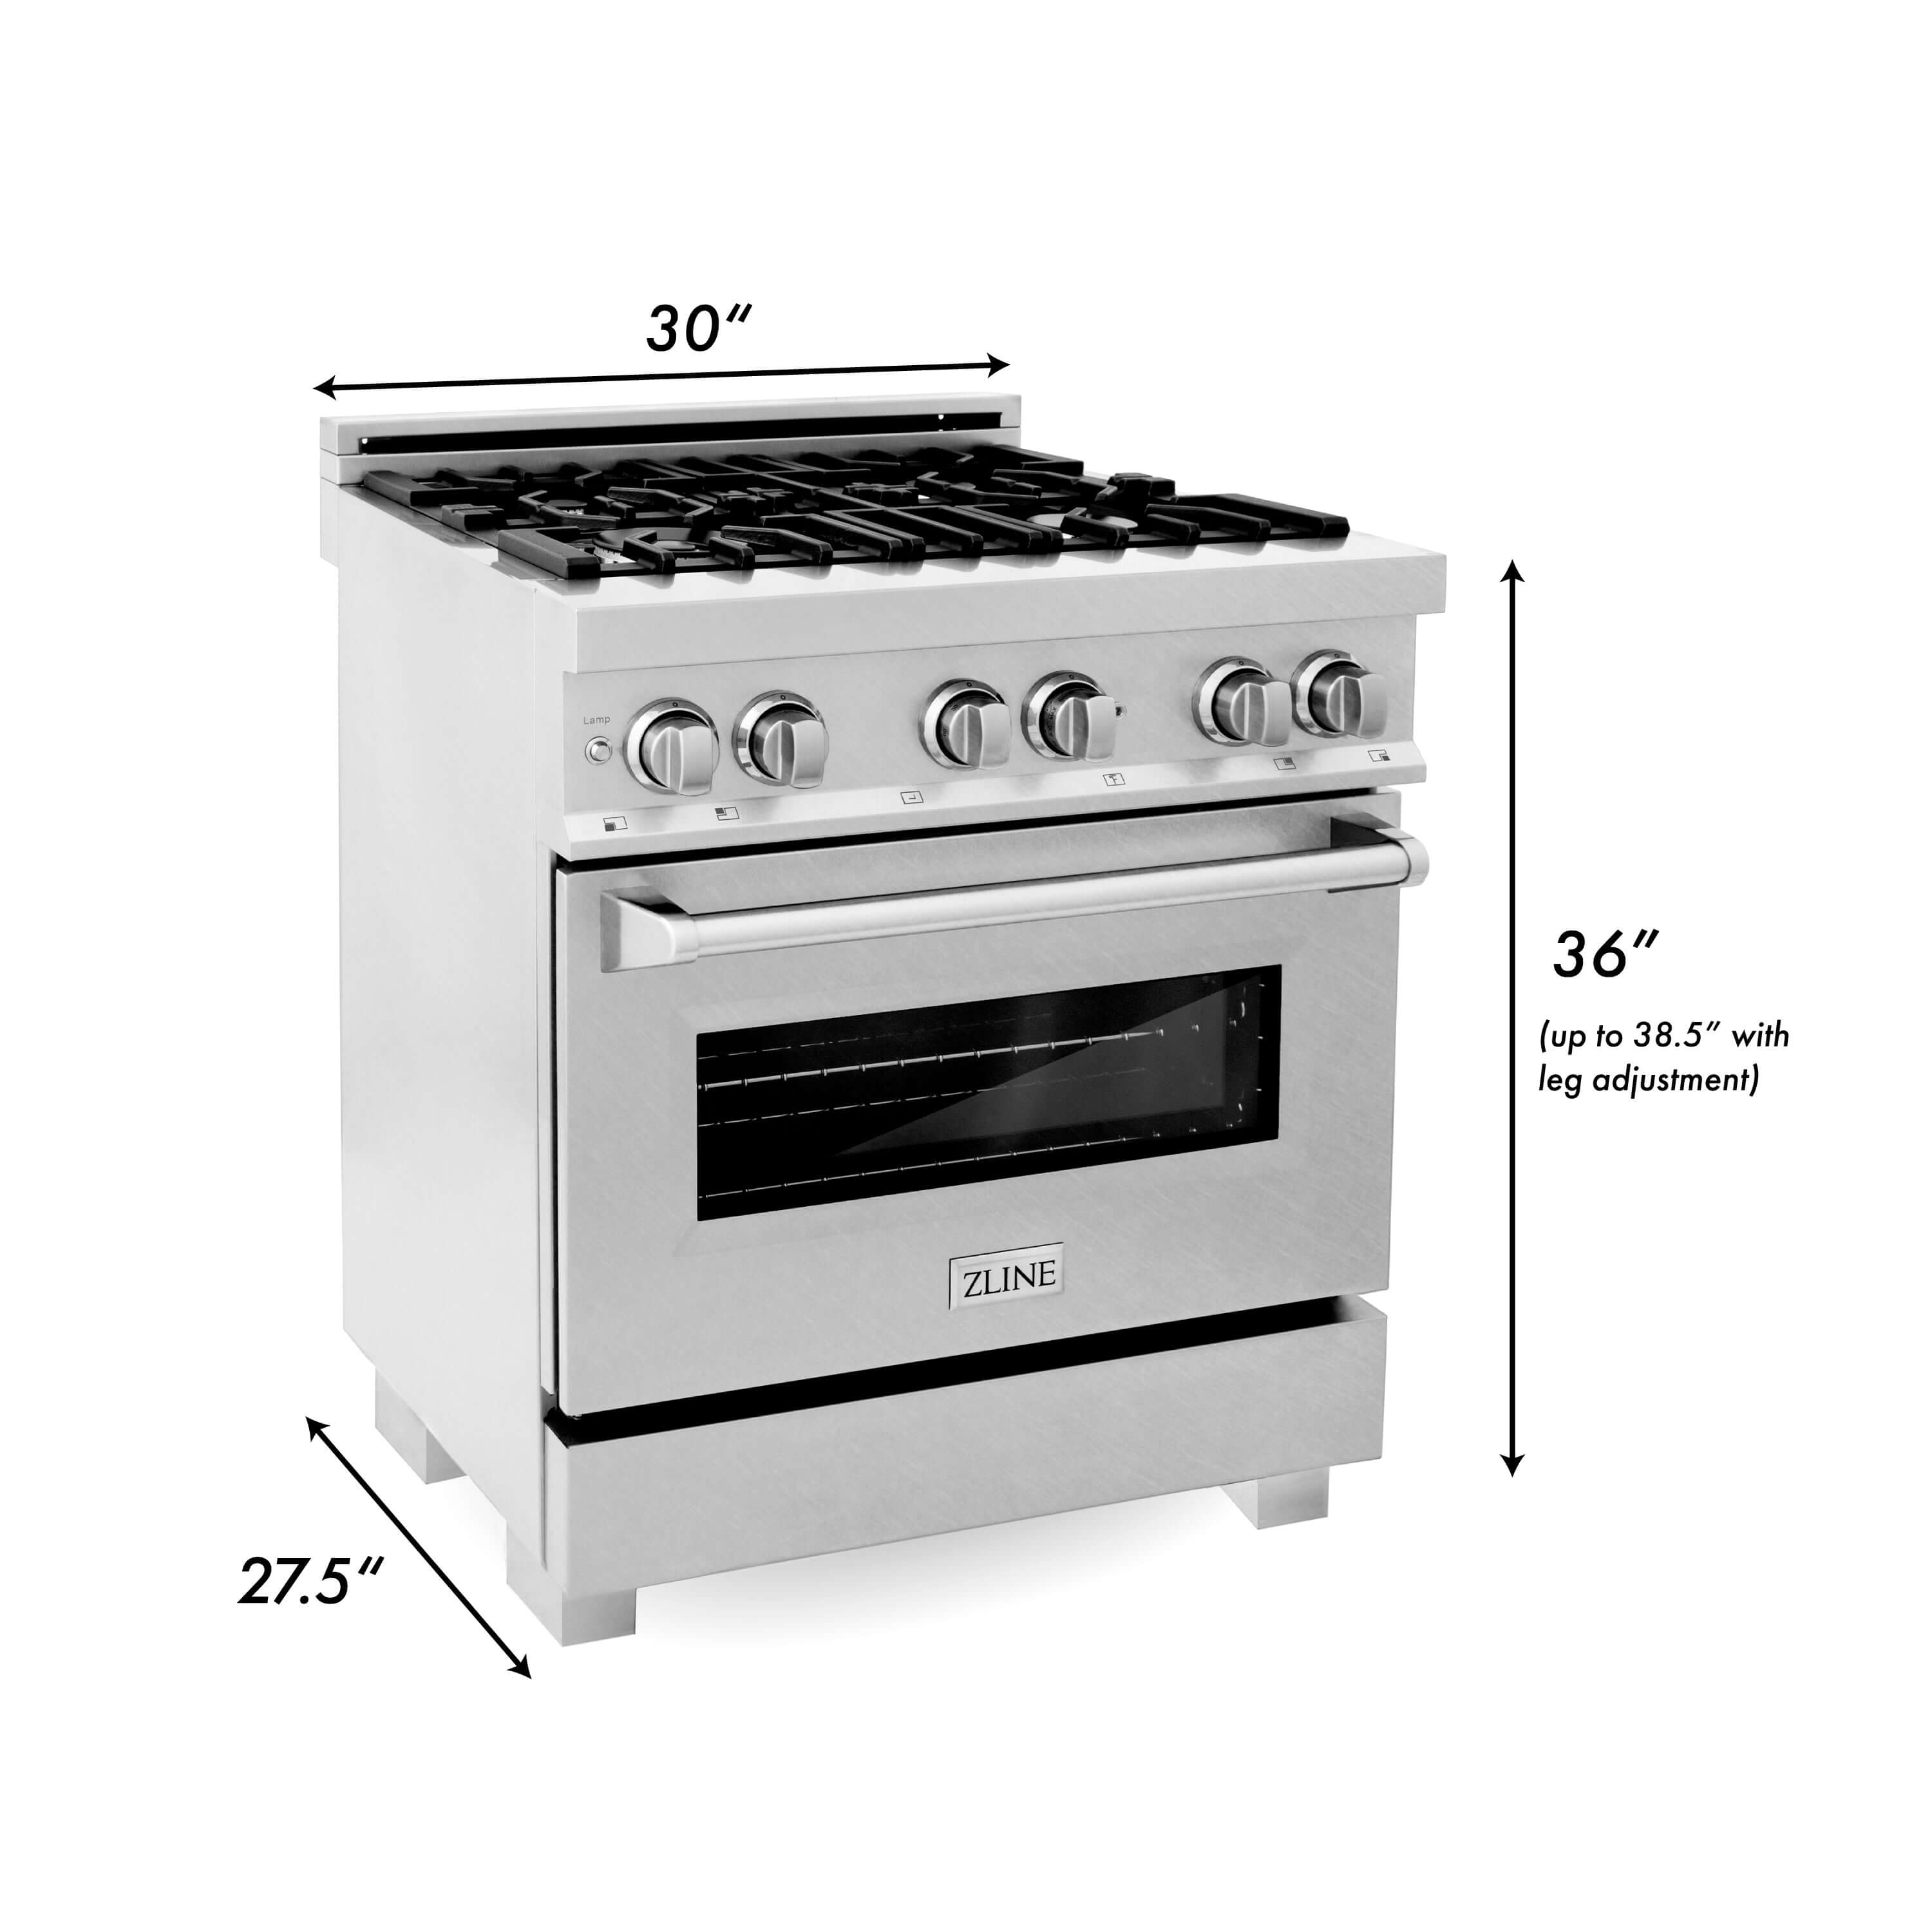 ZLINE 30 in. Kitchen Package with DuraSnow® Stainless Steel Dual Fuel Range and Convertible Vent Range Hood (2KP-RASSNRH30) dimensional diagram with measurements.